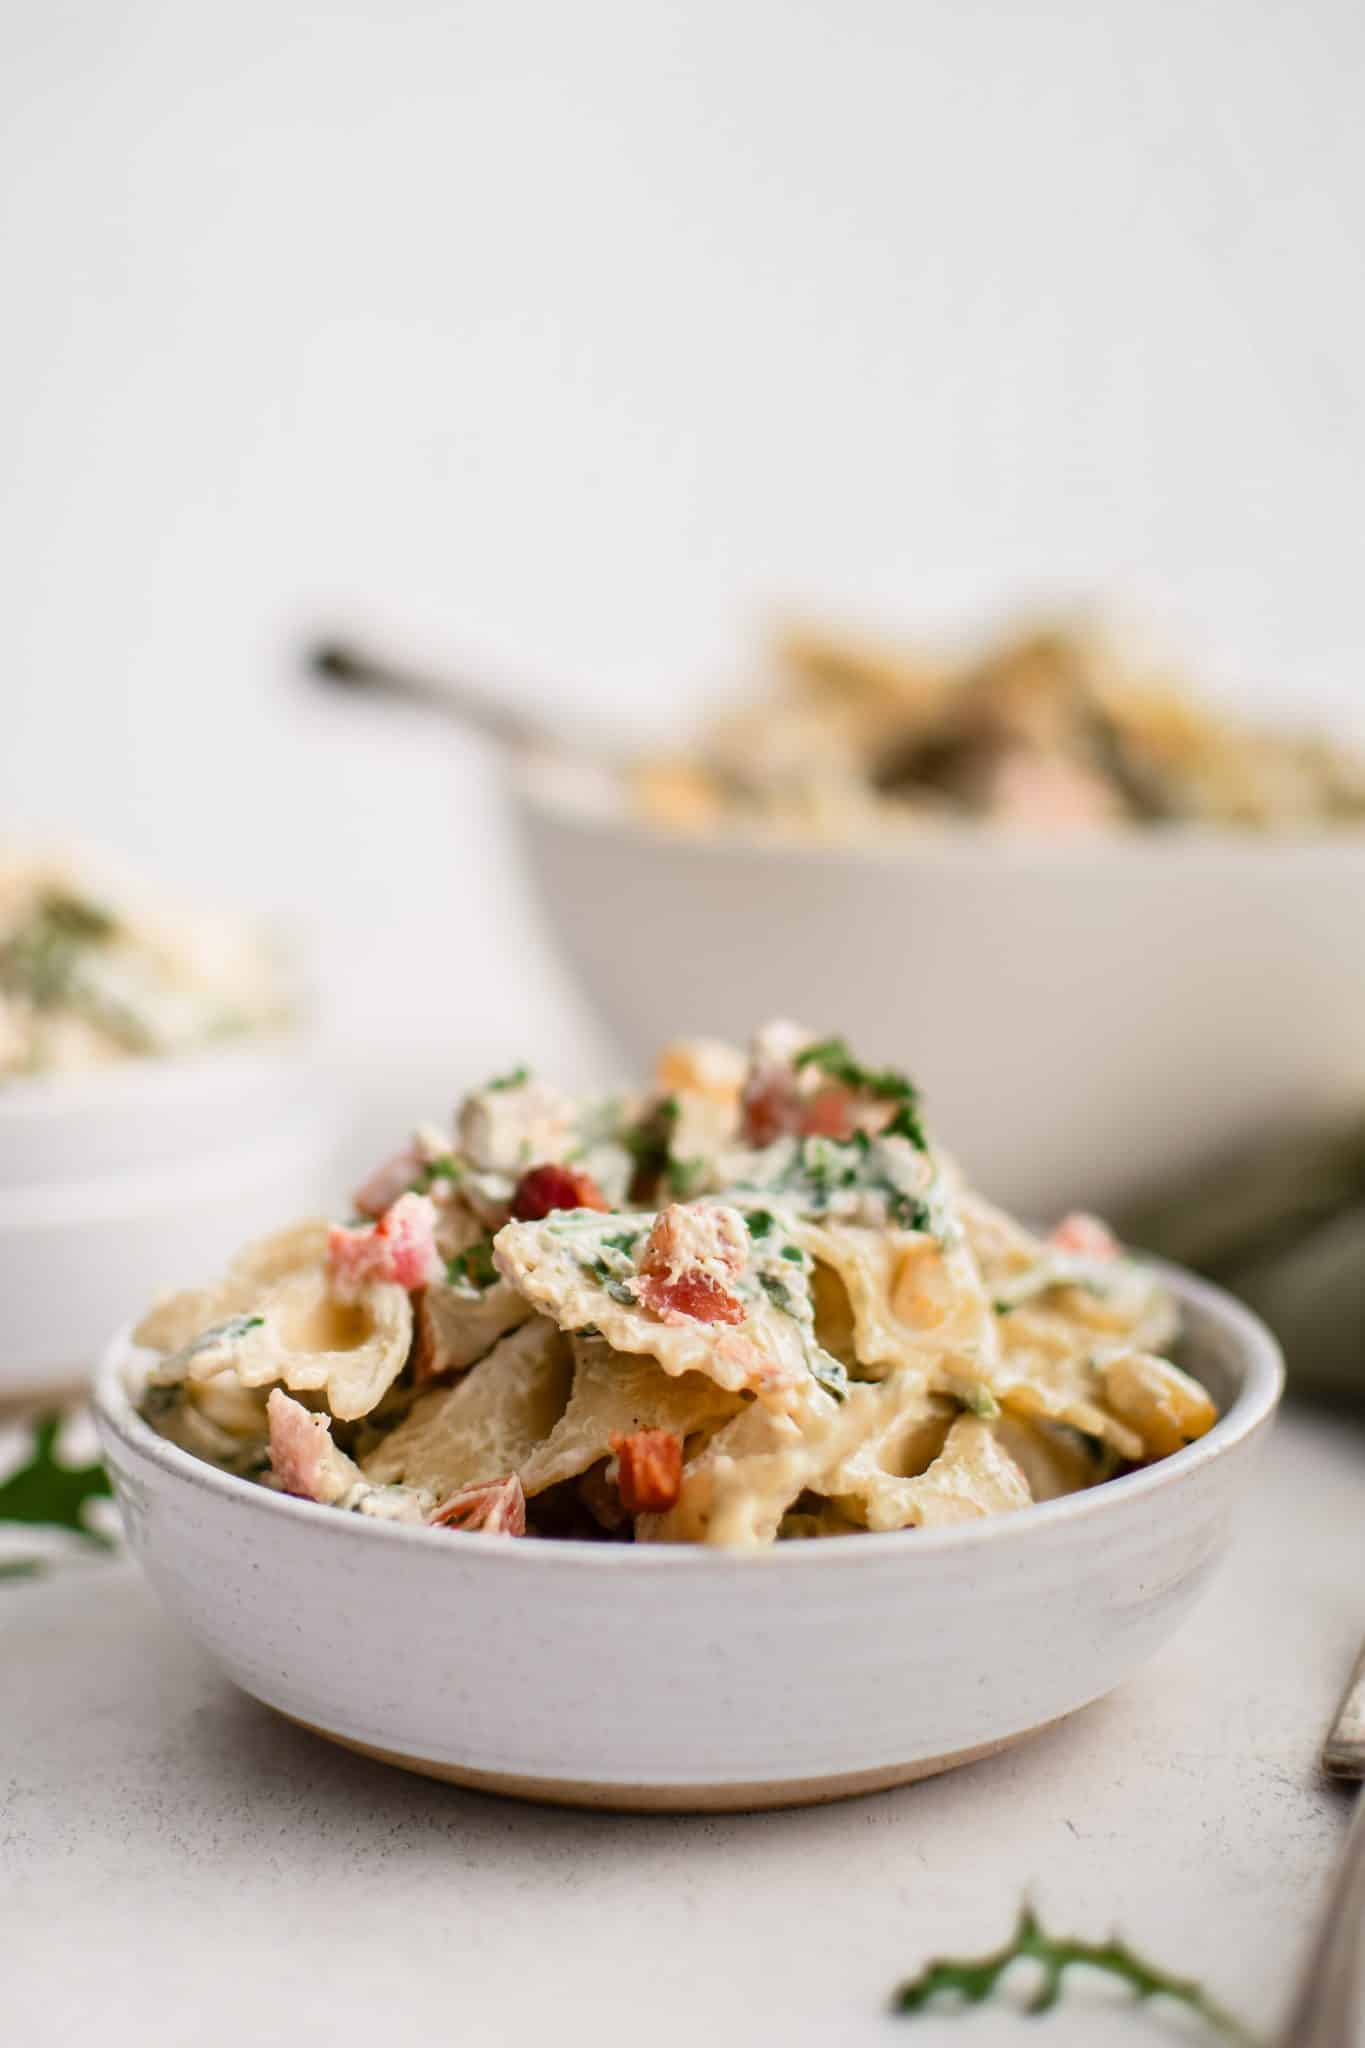 Small serving bowl filled with creamy BLT pasta salad made with bowtie pasta, arugula, avocado, tomato, bacon, and corn in a creamy mayo and sour cream dressing.